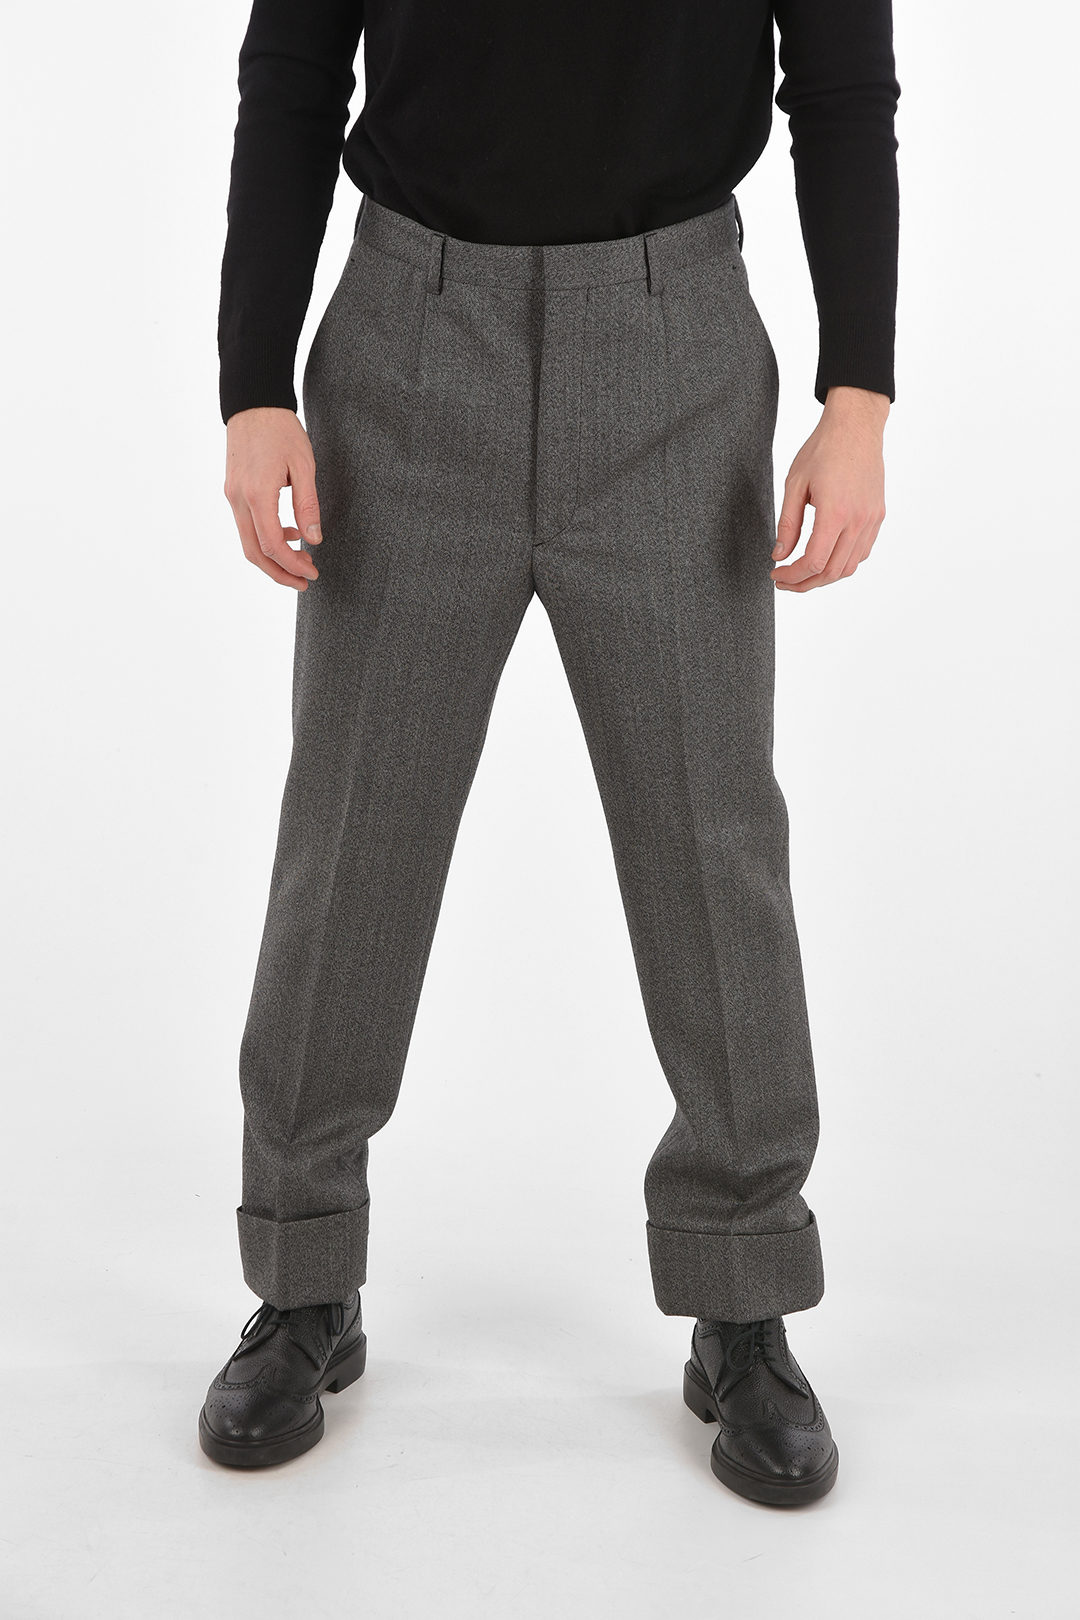 Prada Herringbone Wool Pants with Removable Spats men - Glamood Outlet